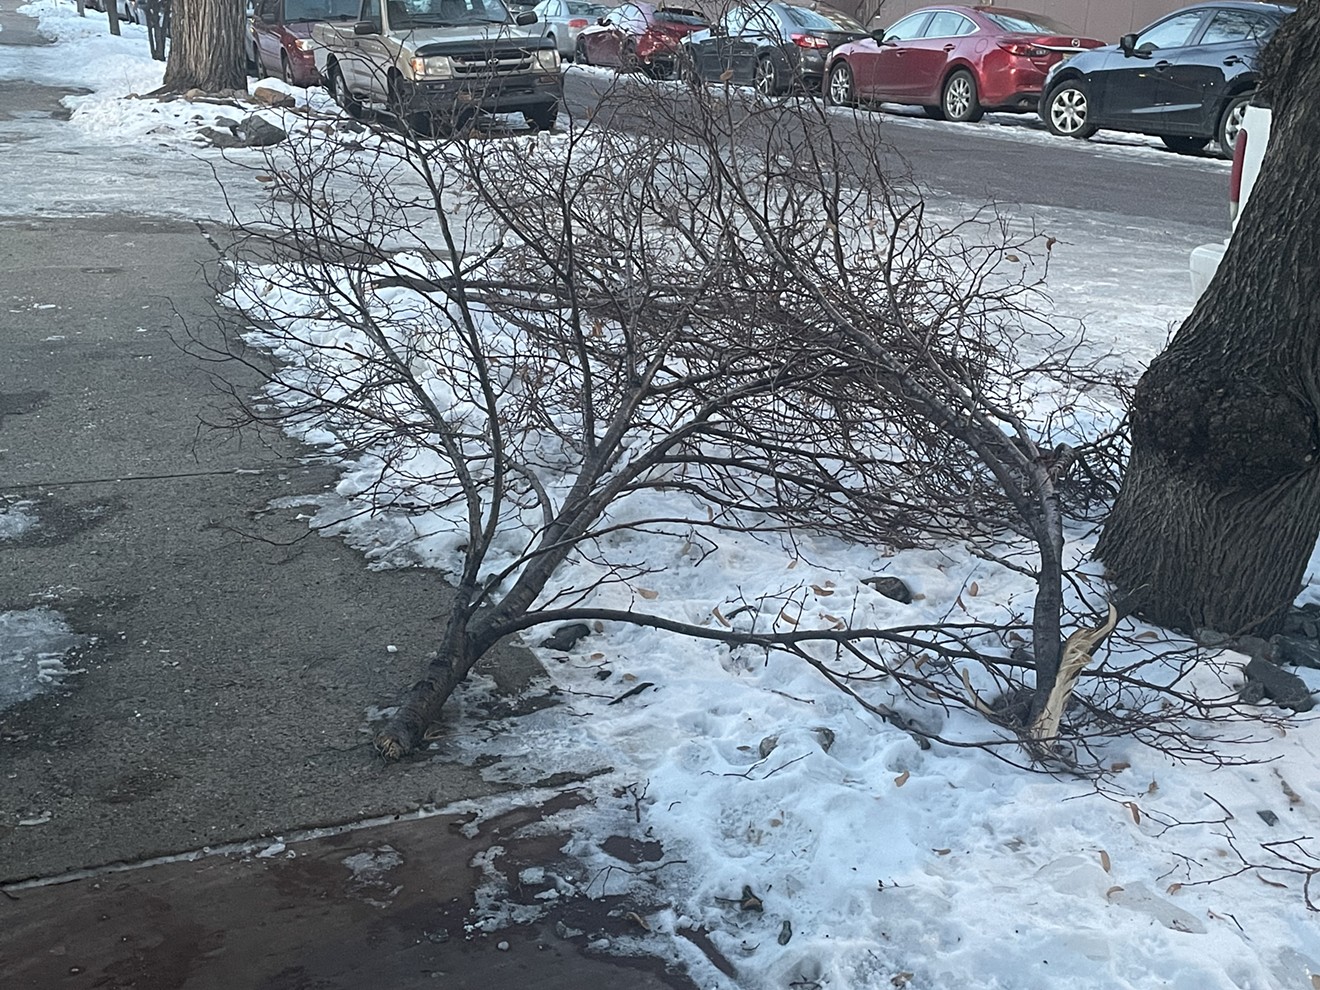 Tree branches have found unfortunate new homes on the ground, and if this is in front of your house, you're on the hook for the cleanup.